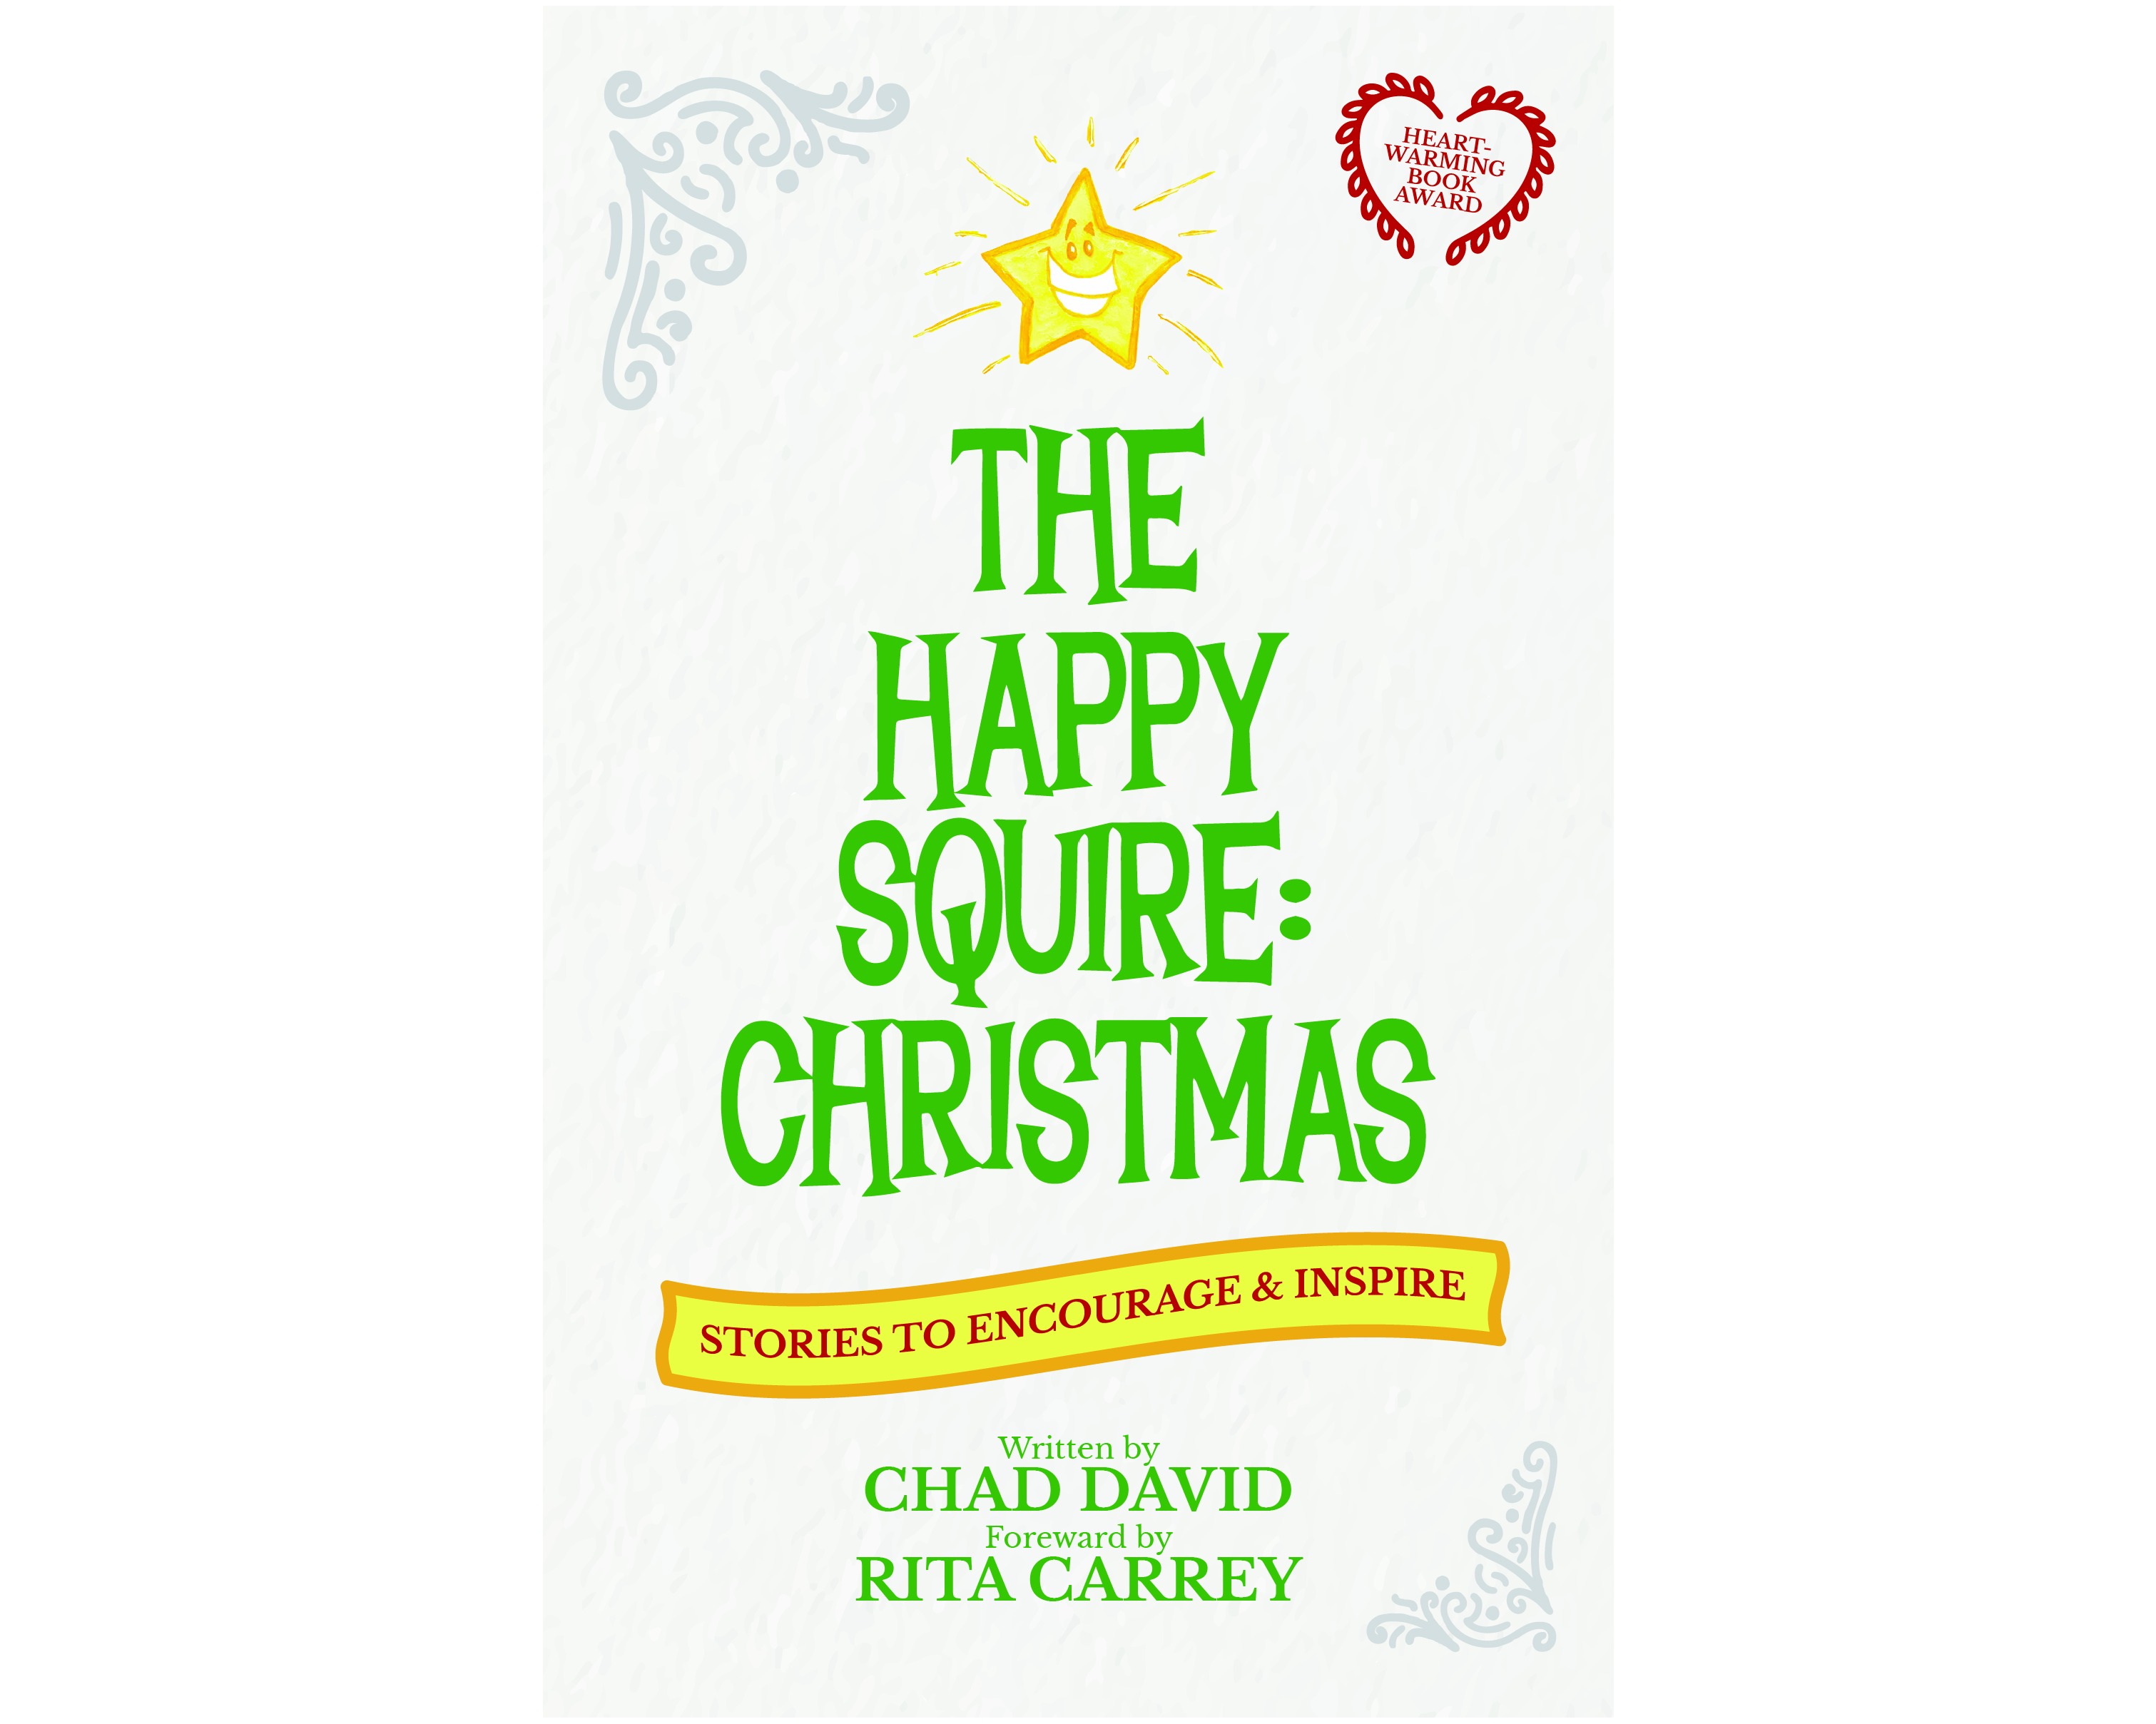 The Happy Squire Christmas Stories to Insprie